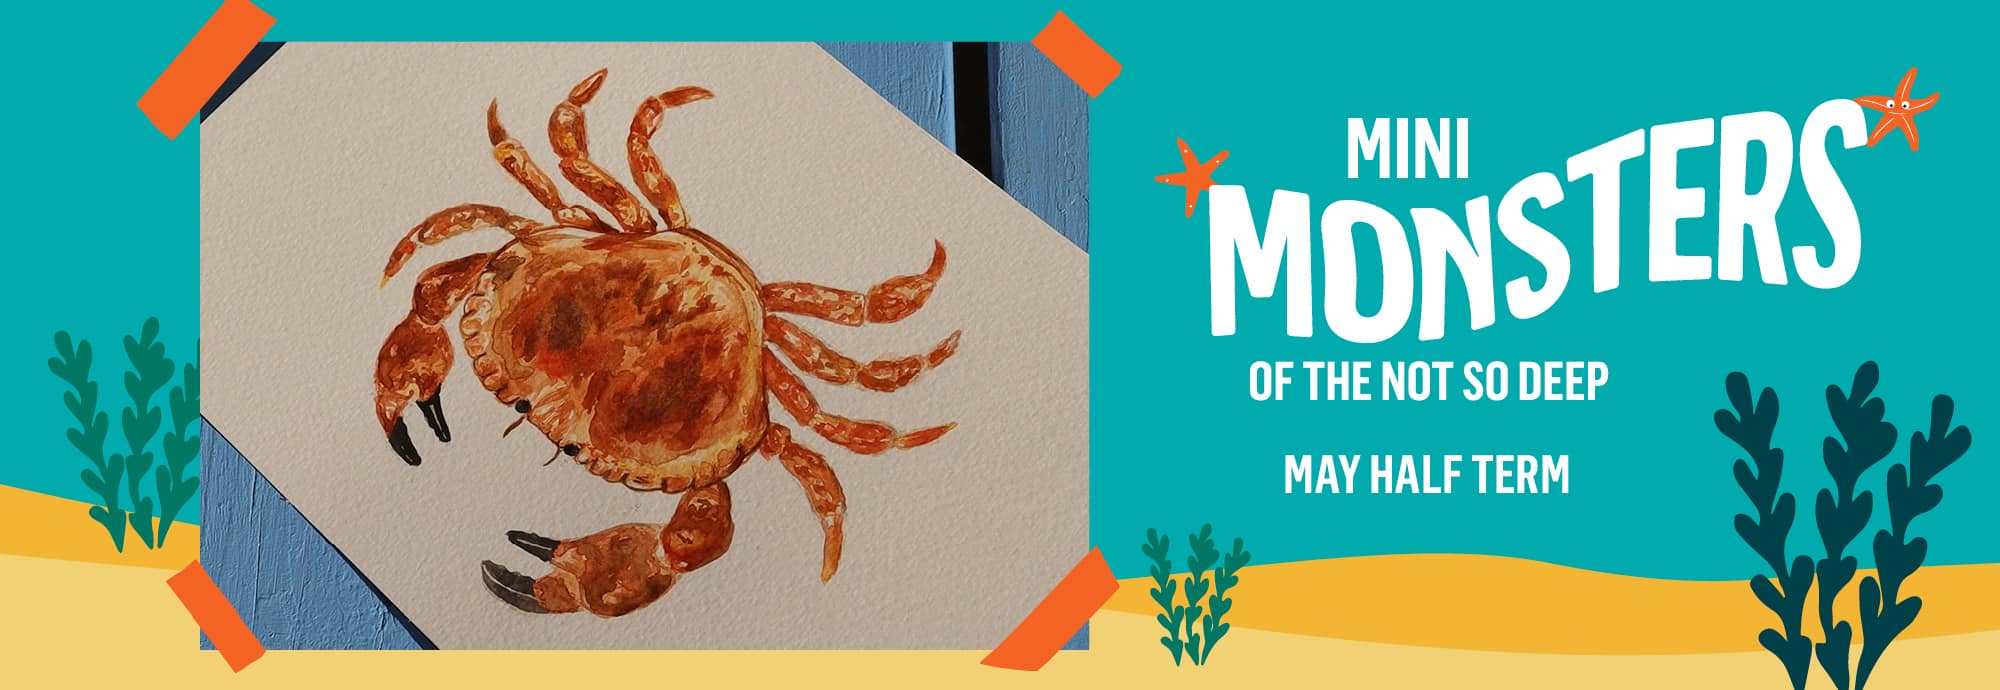 On the right, white text against a blue-green background reads 'Mini Monsters of the Not So Deep' and 'May half term'. On the left is a photo of a painting of a crab,